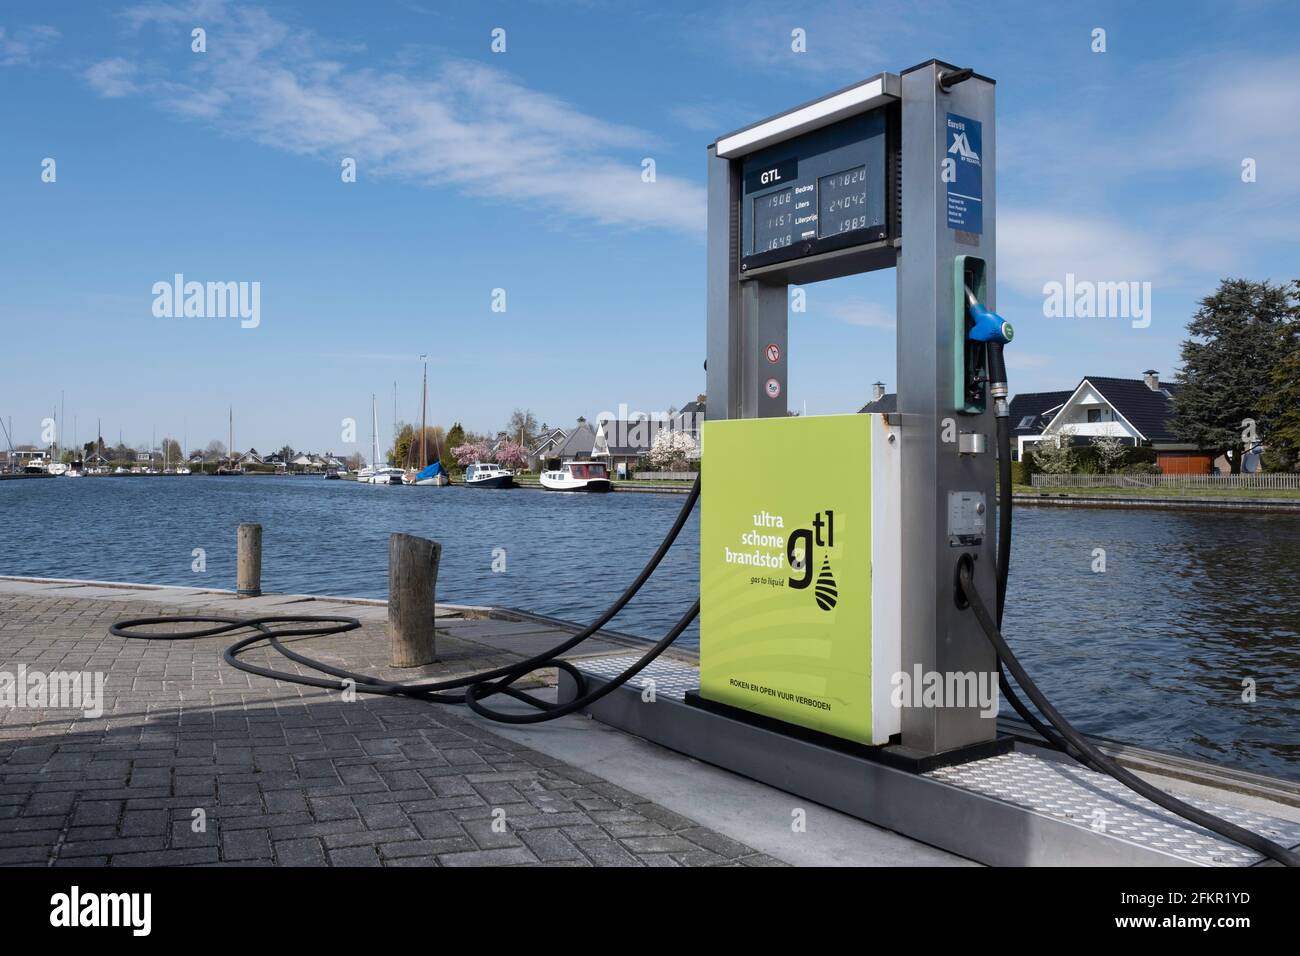 Gas station for clean fuel unleaded 98 gasoline along the waterfront with moored boats in the harbor with cityscape of Lemmer, Netherlands Stock Photo